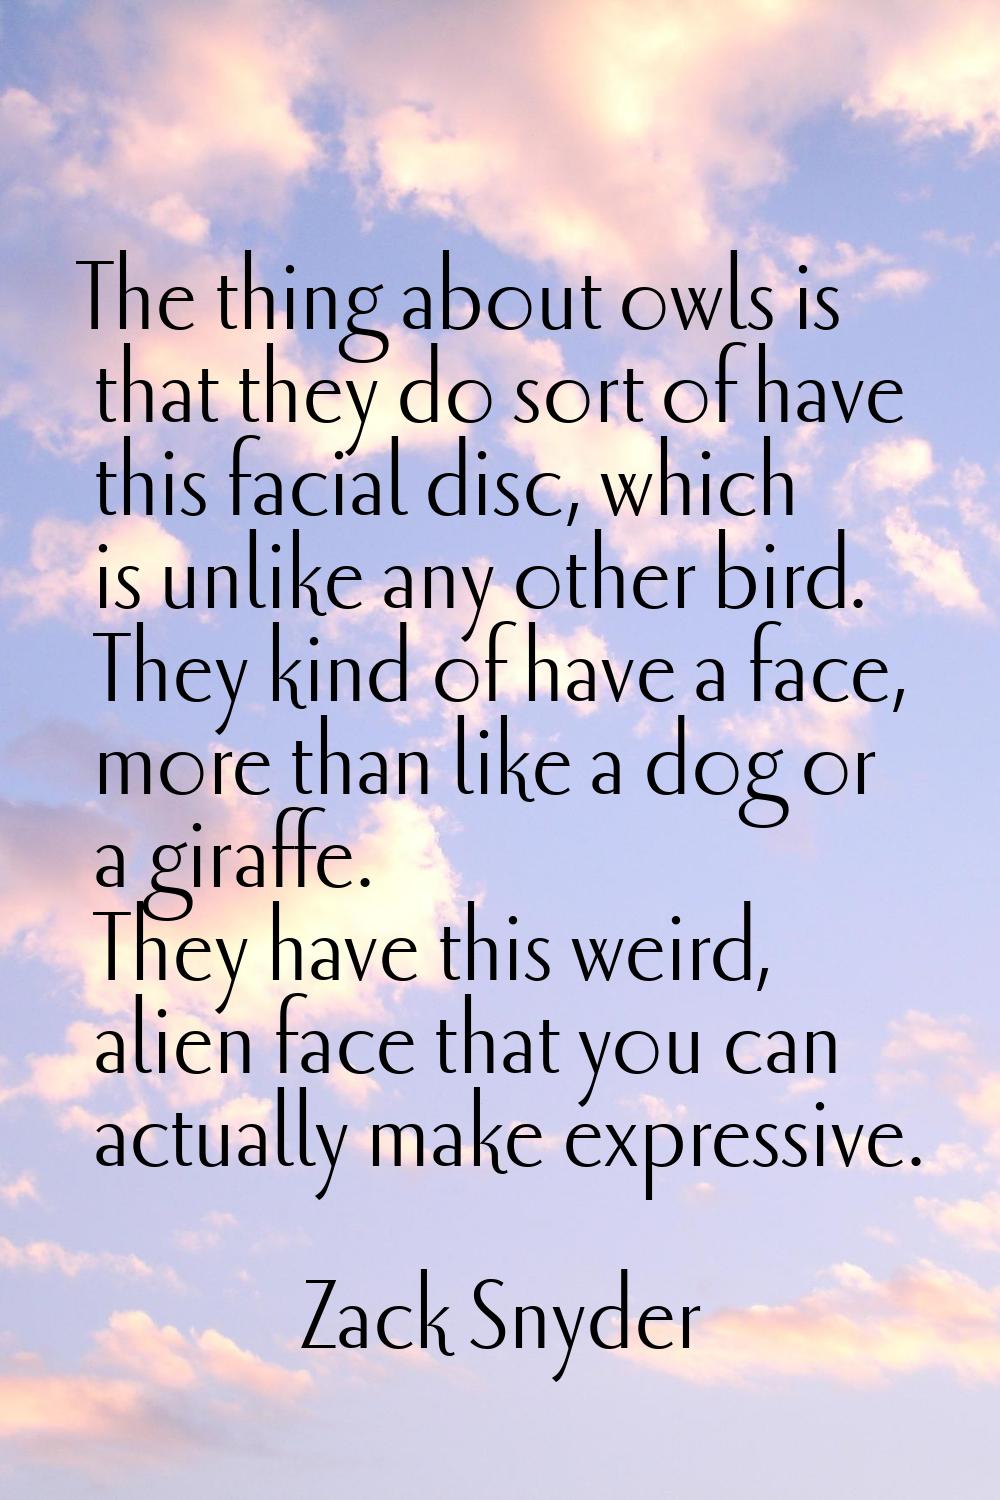 The thing about owls is that they do sort of have this facial disc, which is unlike any other bird.